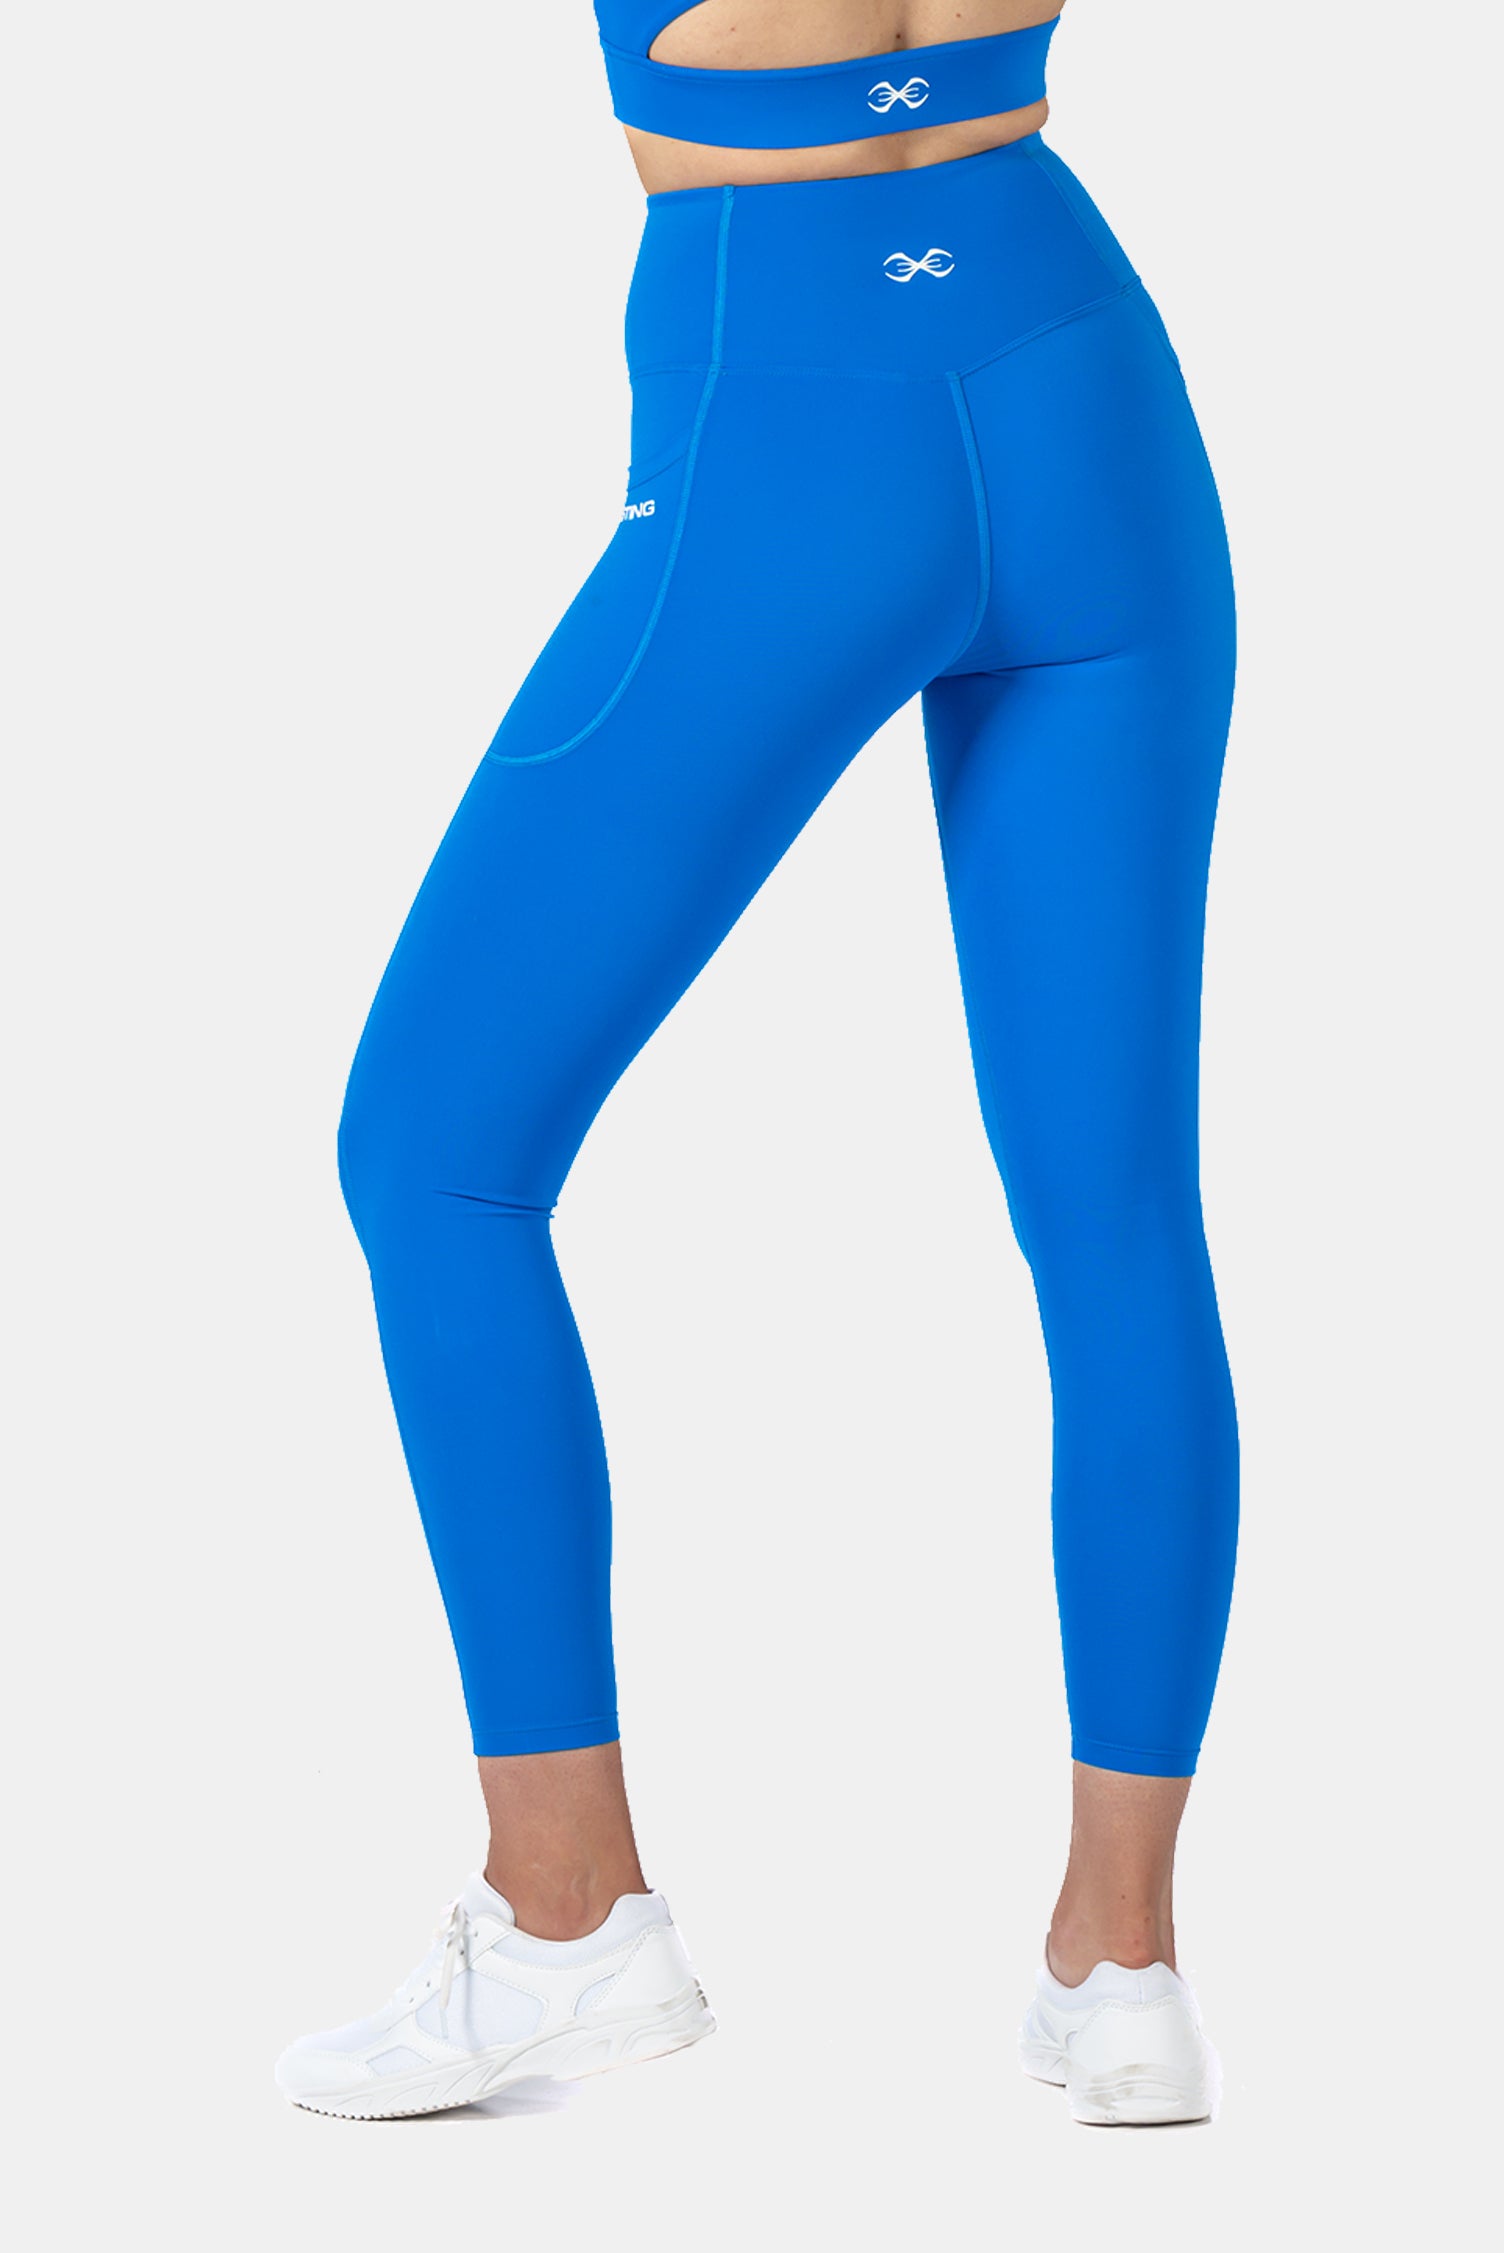 Wholesale Yoga Leggings for Women High Waist Belly Control Outdoor Running  Fitness Pants Gym Exercise Push up Running Bottoming Sports Pants - China  Yoga and Gym price | Made-in-China.com